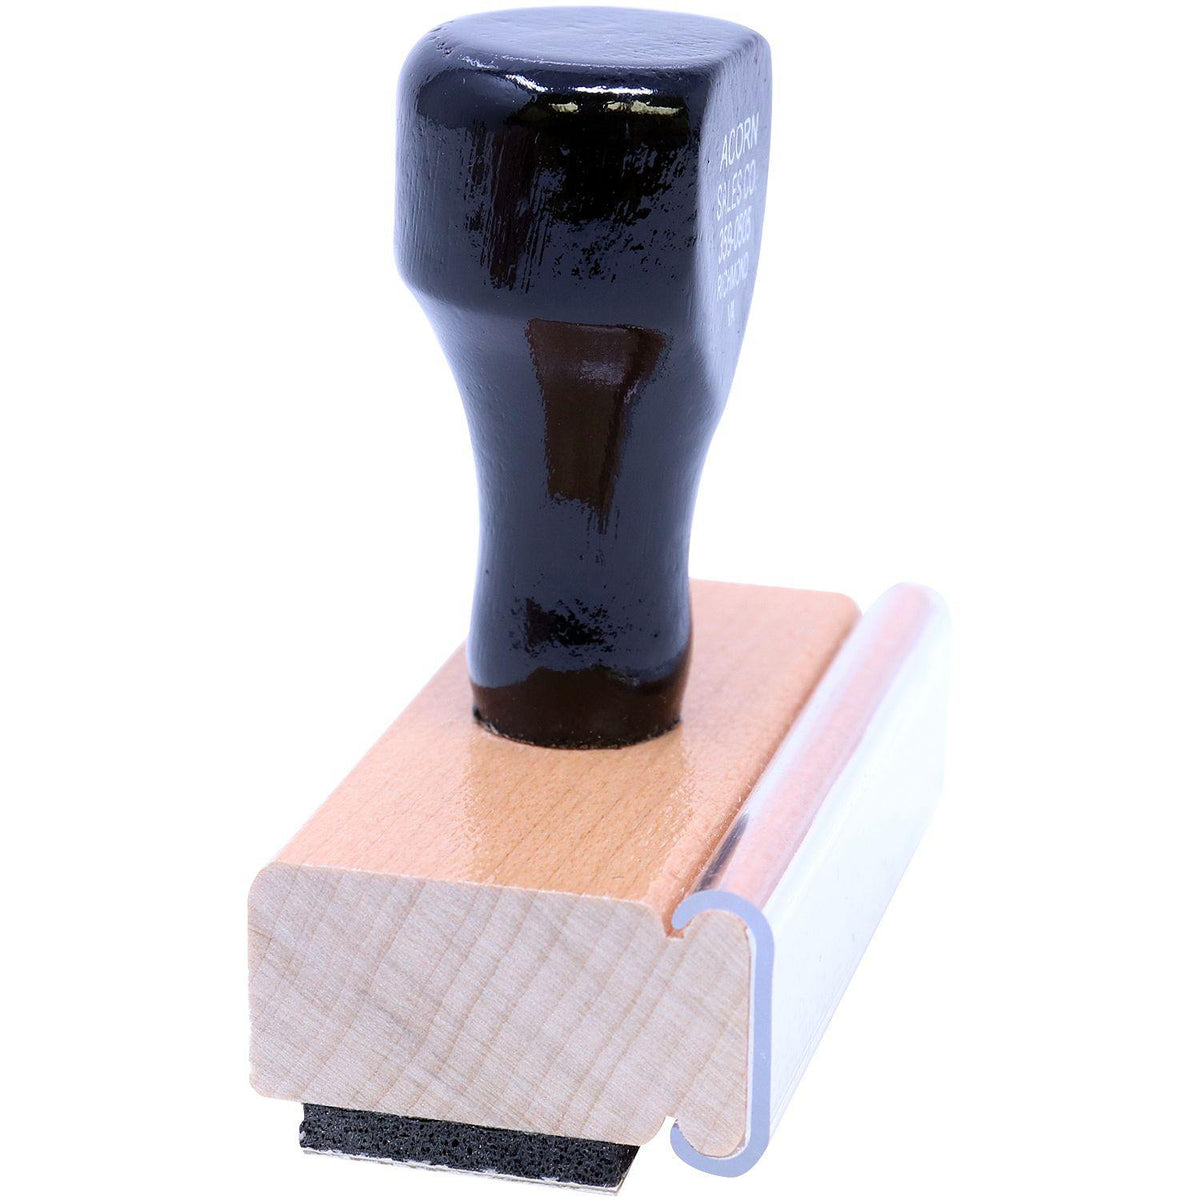 Side View of Large Entered On Rubber Stamp at an Angle